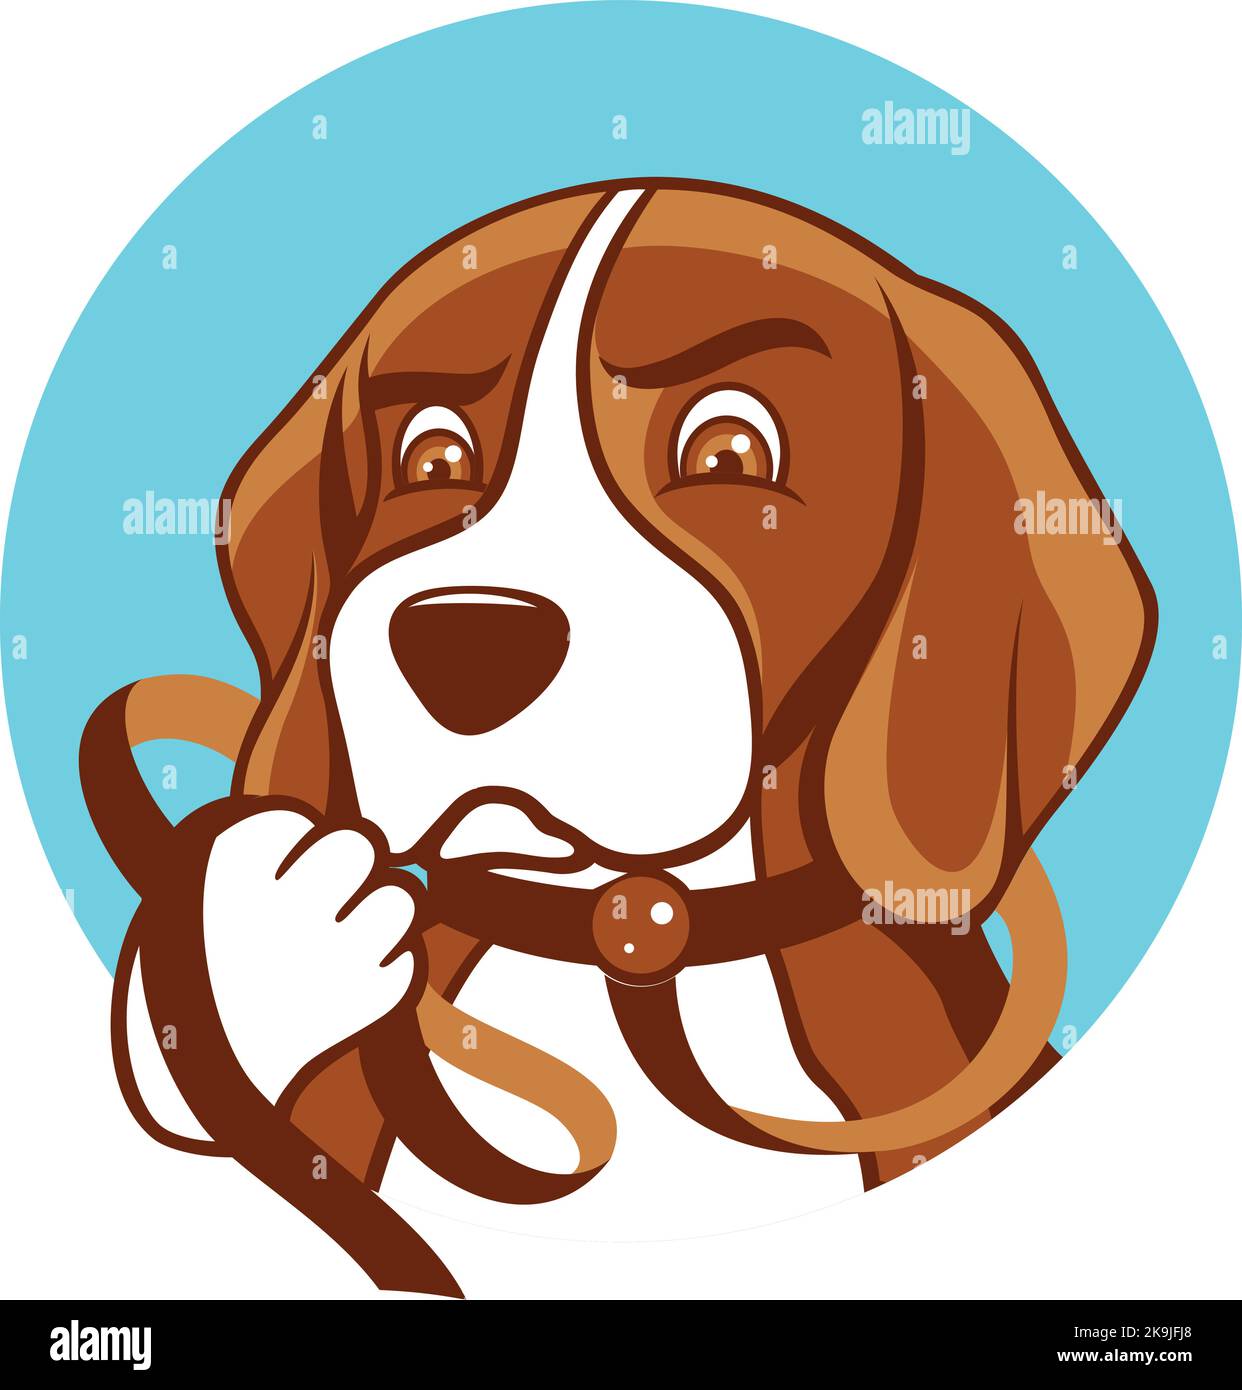 The Dog Hesitates when Looking at the Belt Stock Vector